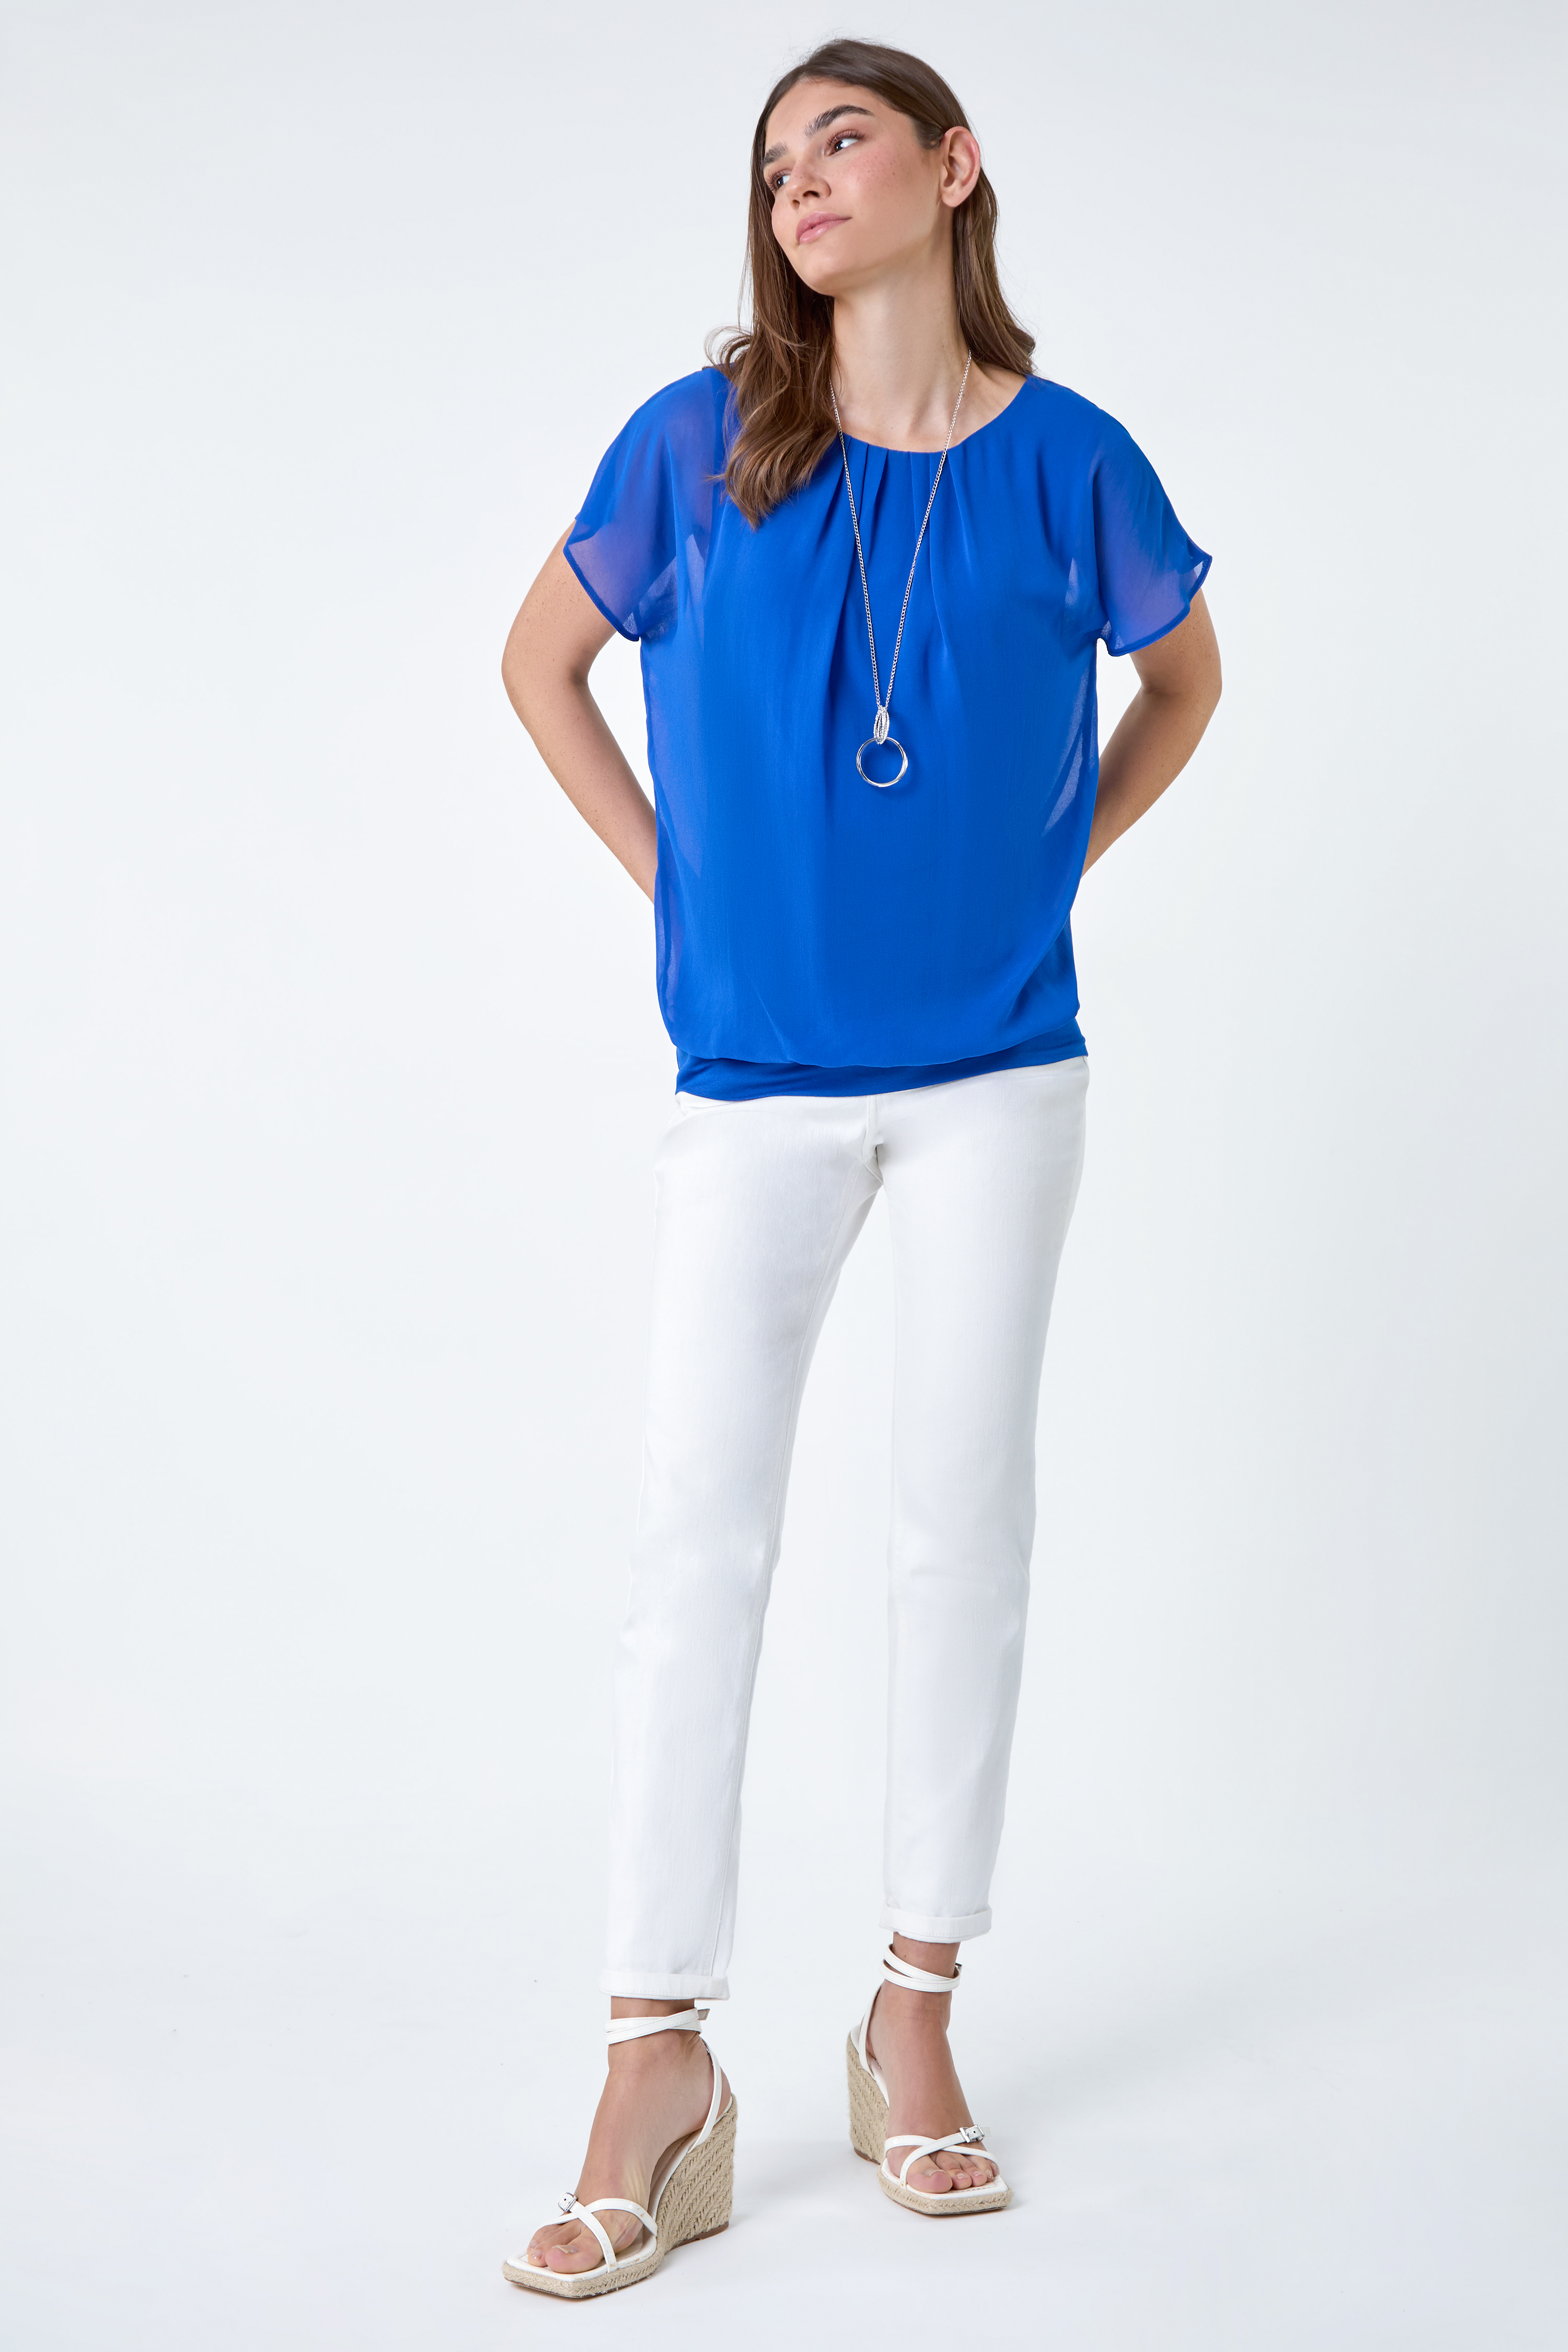 Royal Blue Chiffon Jersey Blouson Top with Necklace, Image 4 of 5